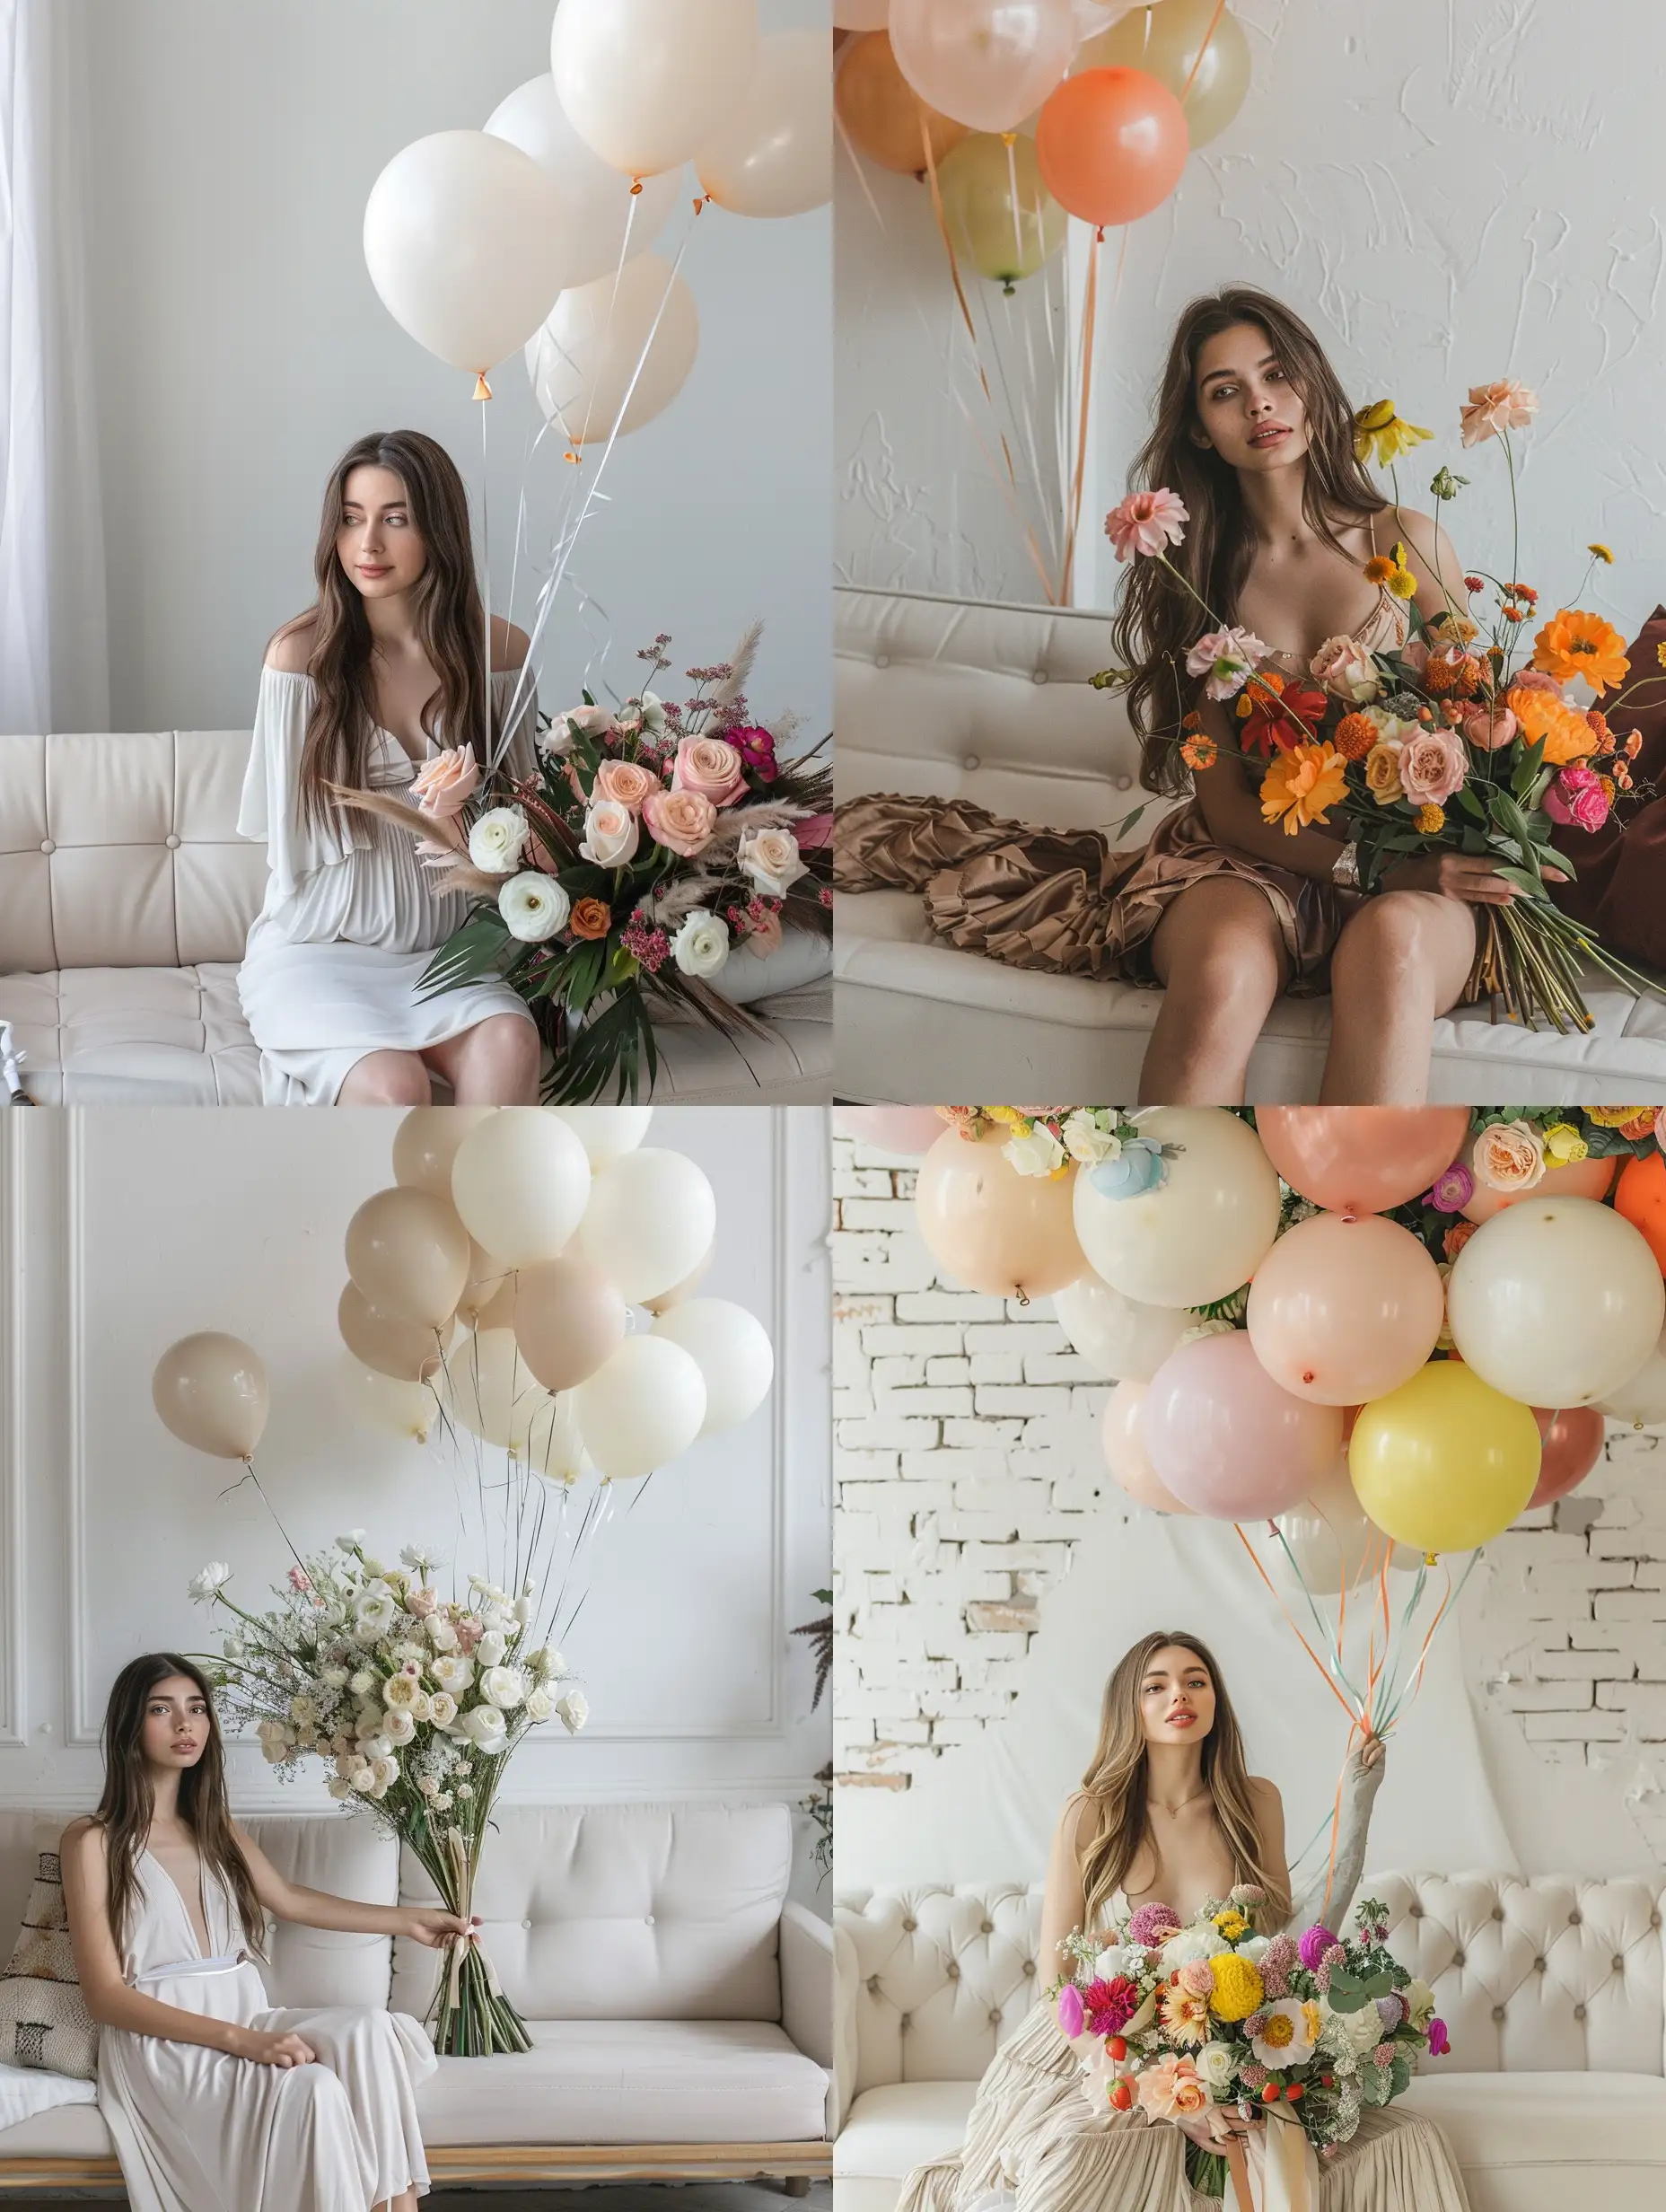 With long hair In a dress on the couch Against a white beautiful wall in the studio with balloons made of falsa on her birthday holding a beautiful lush bouquet of flowers